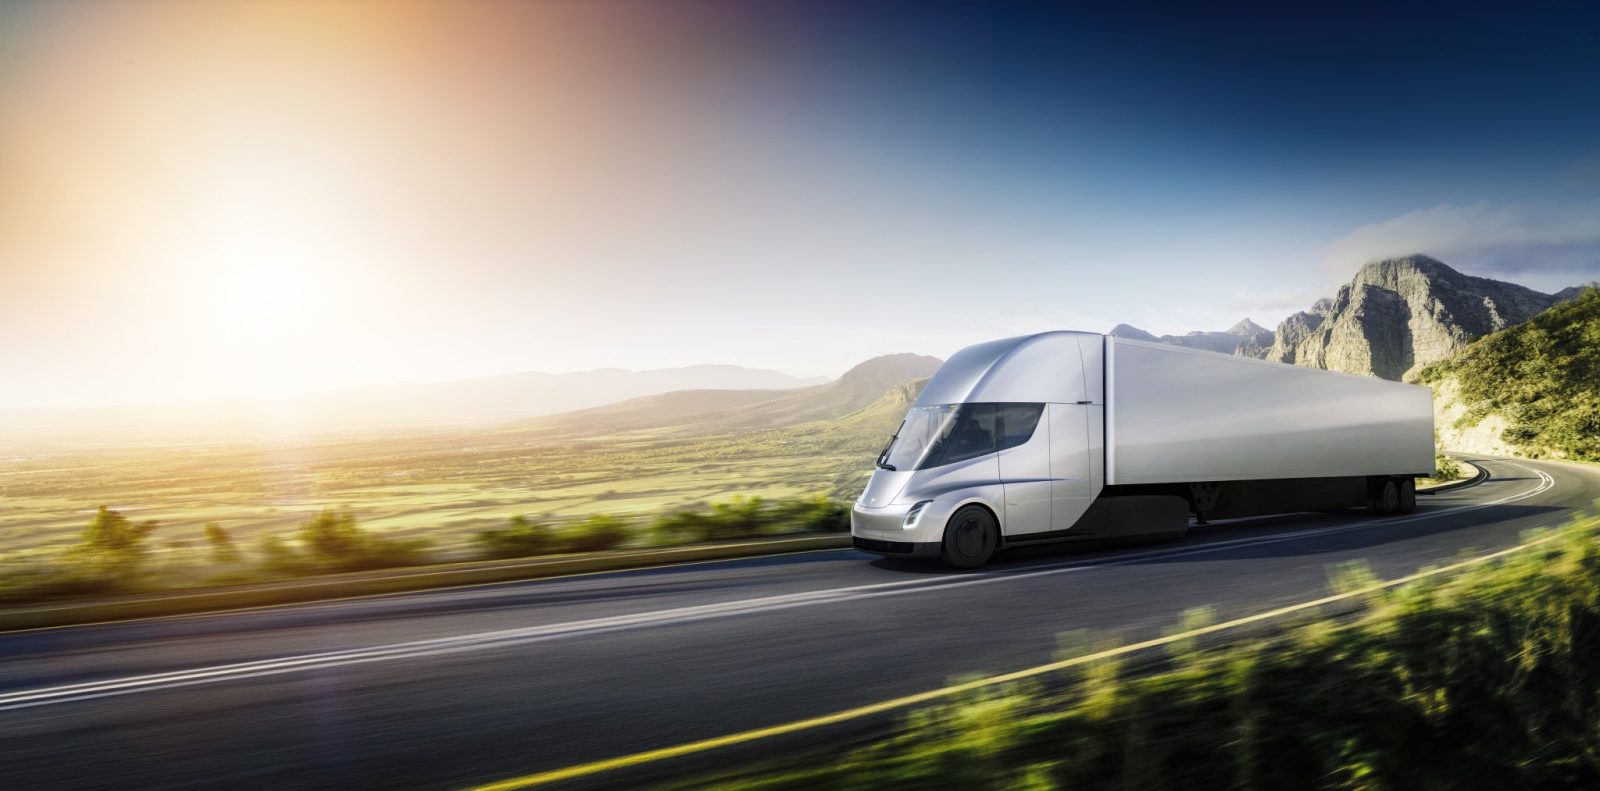 Live Blog Follow Along With Our Coverage Of The Tesla Semi